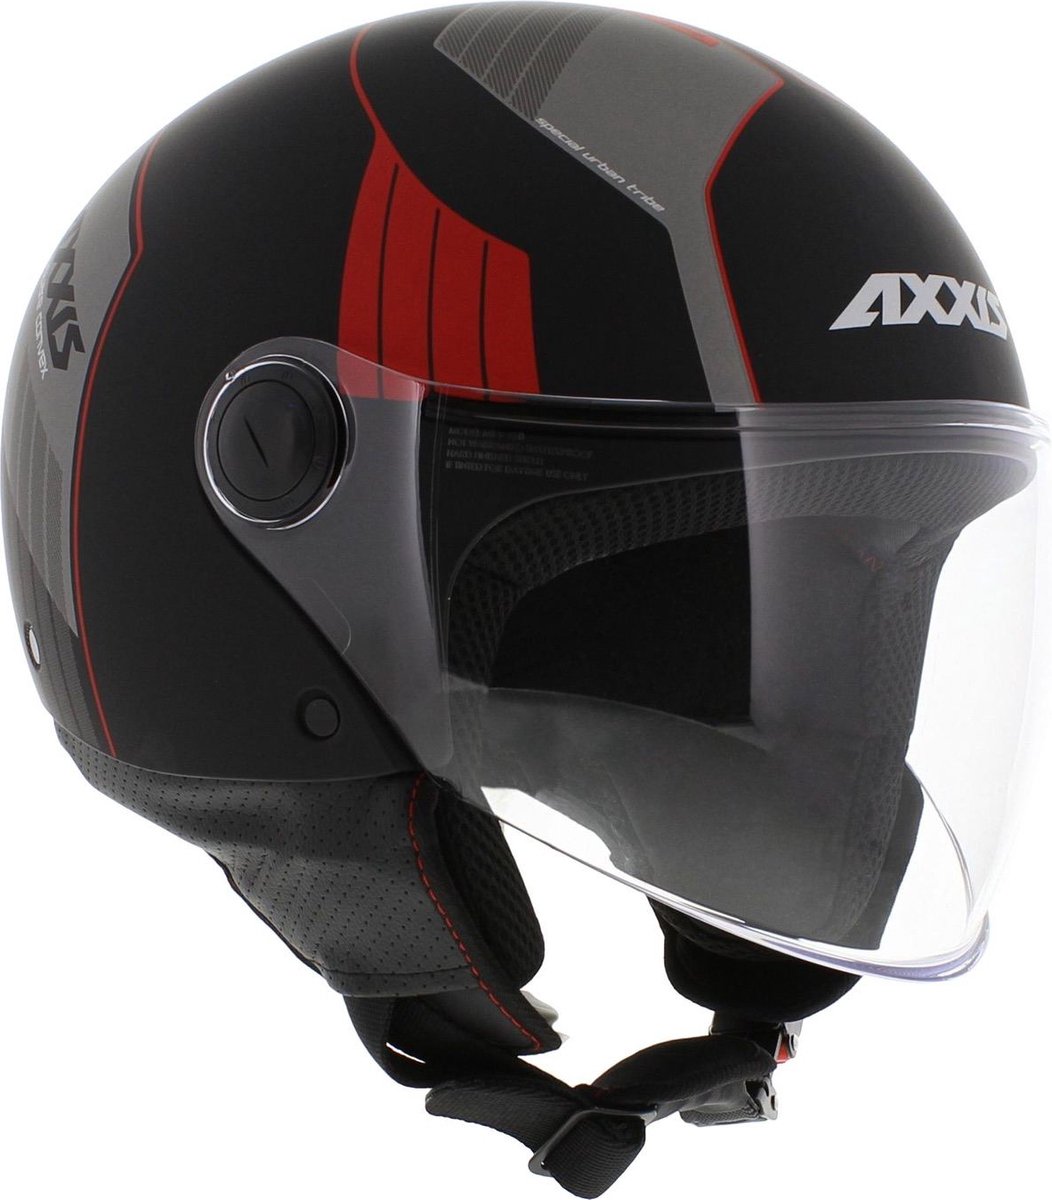 Axxis Square S Convex helm mat zwart rood S